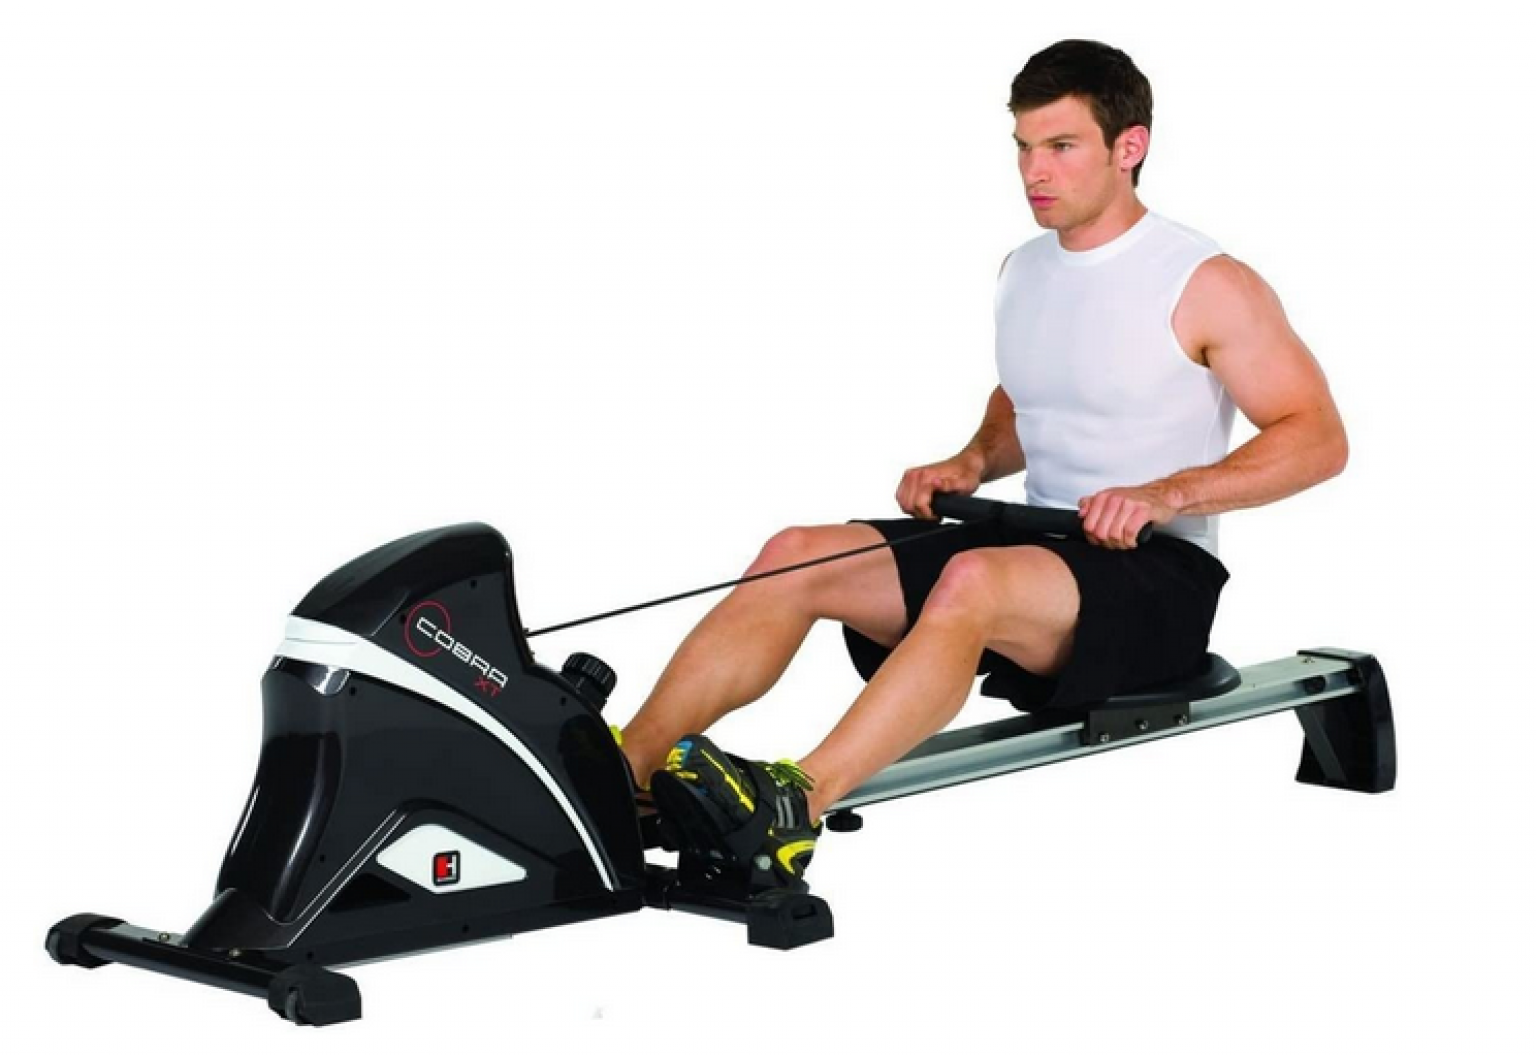 Best Rowing Machine Under £500 UK Reviews - Fitness Fighters